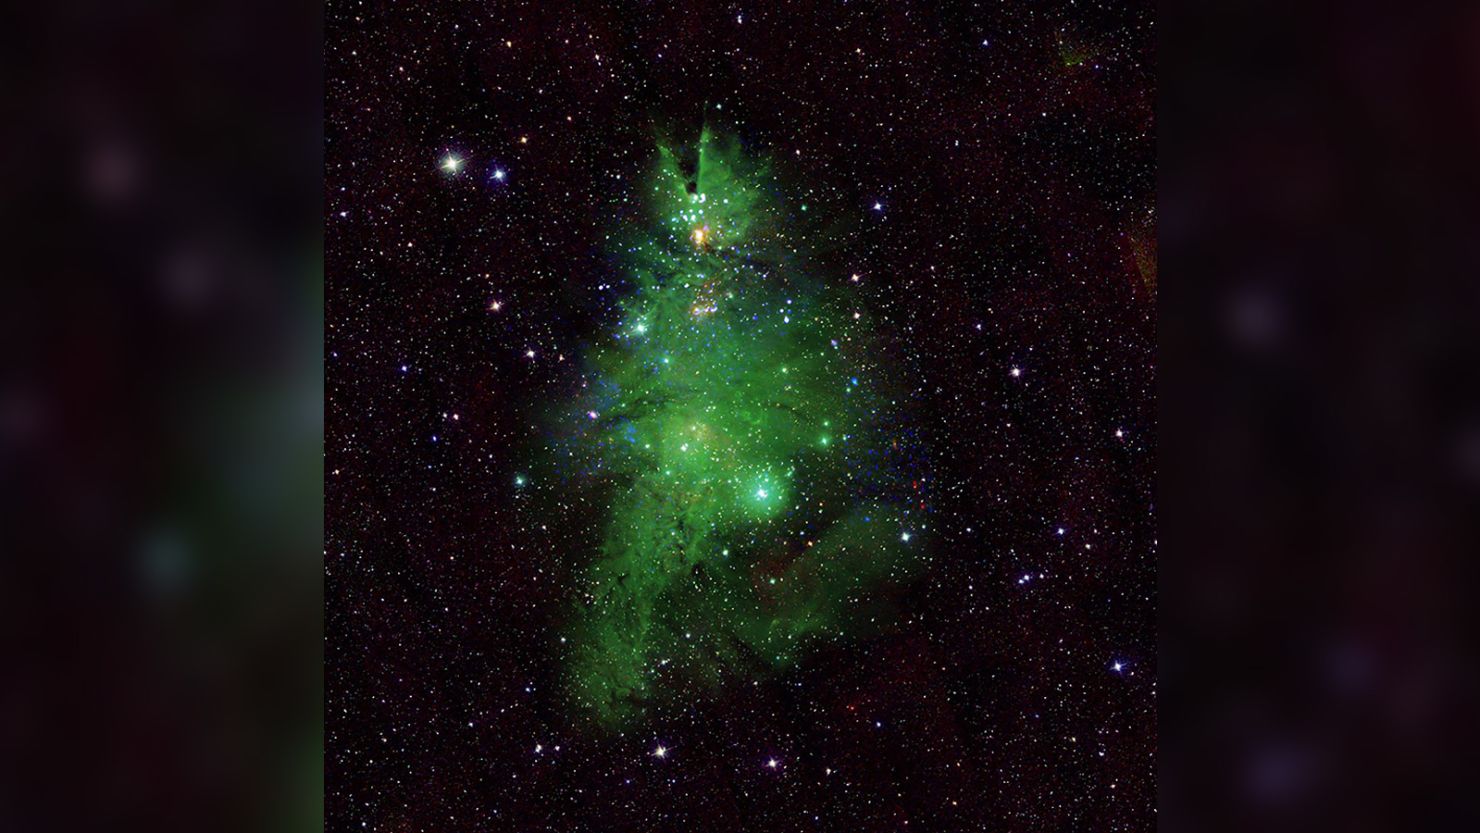 A new composite image showcases the “Christmas Tree Cluster” of young stars located about 2,500 <a href="index.php?page=&url=https%3A%2F%2Fchandra.harvard.edu%2Fphoto%2Fcosmic_distance.html" target="_blank">light-years</a> away from Earth.